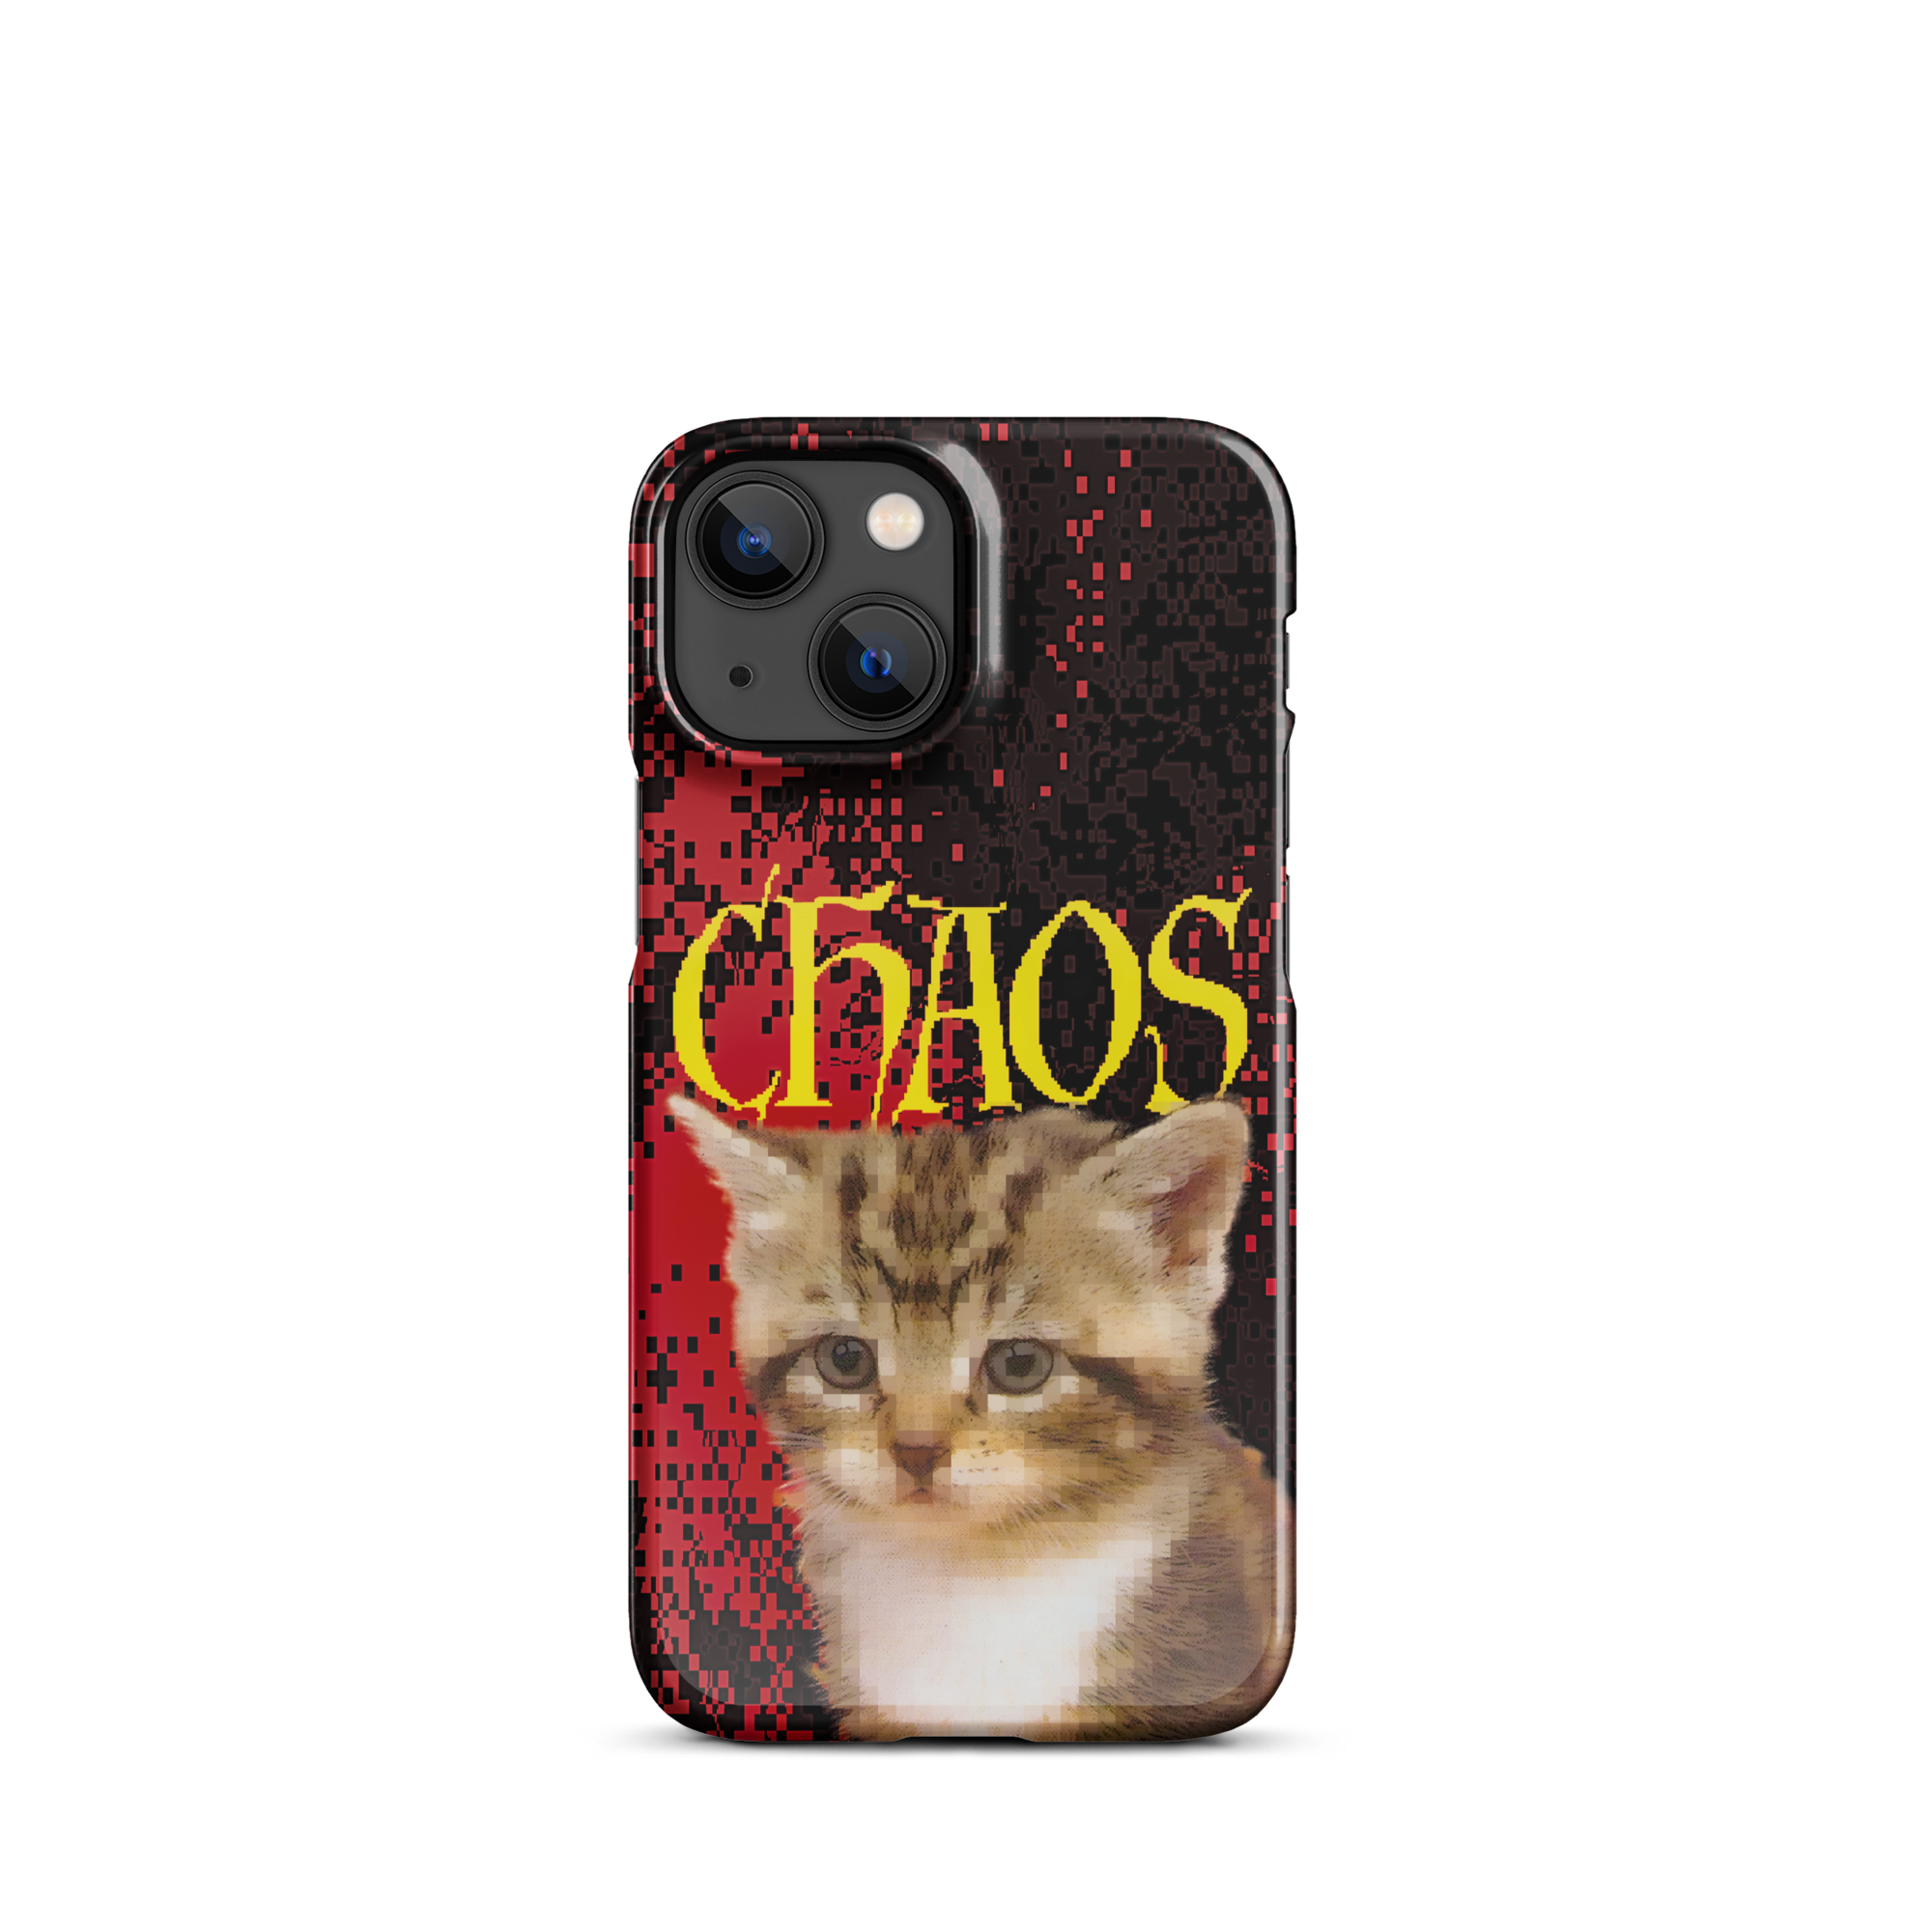 iphone snap case - cha0s